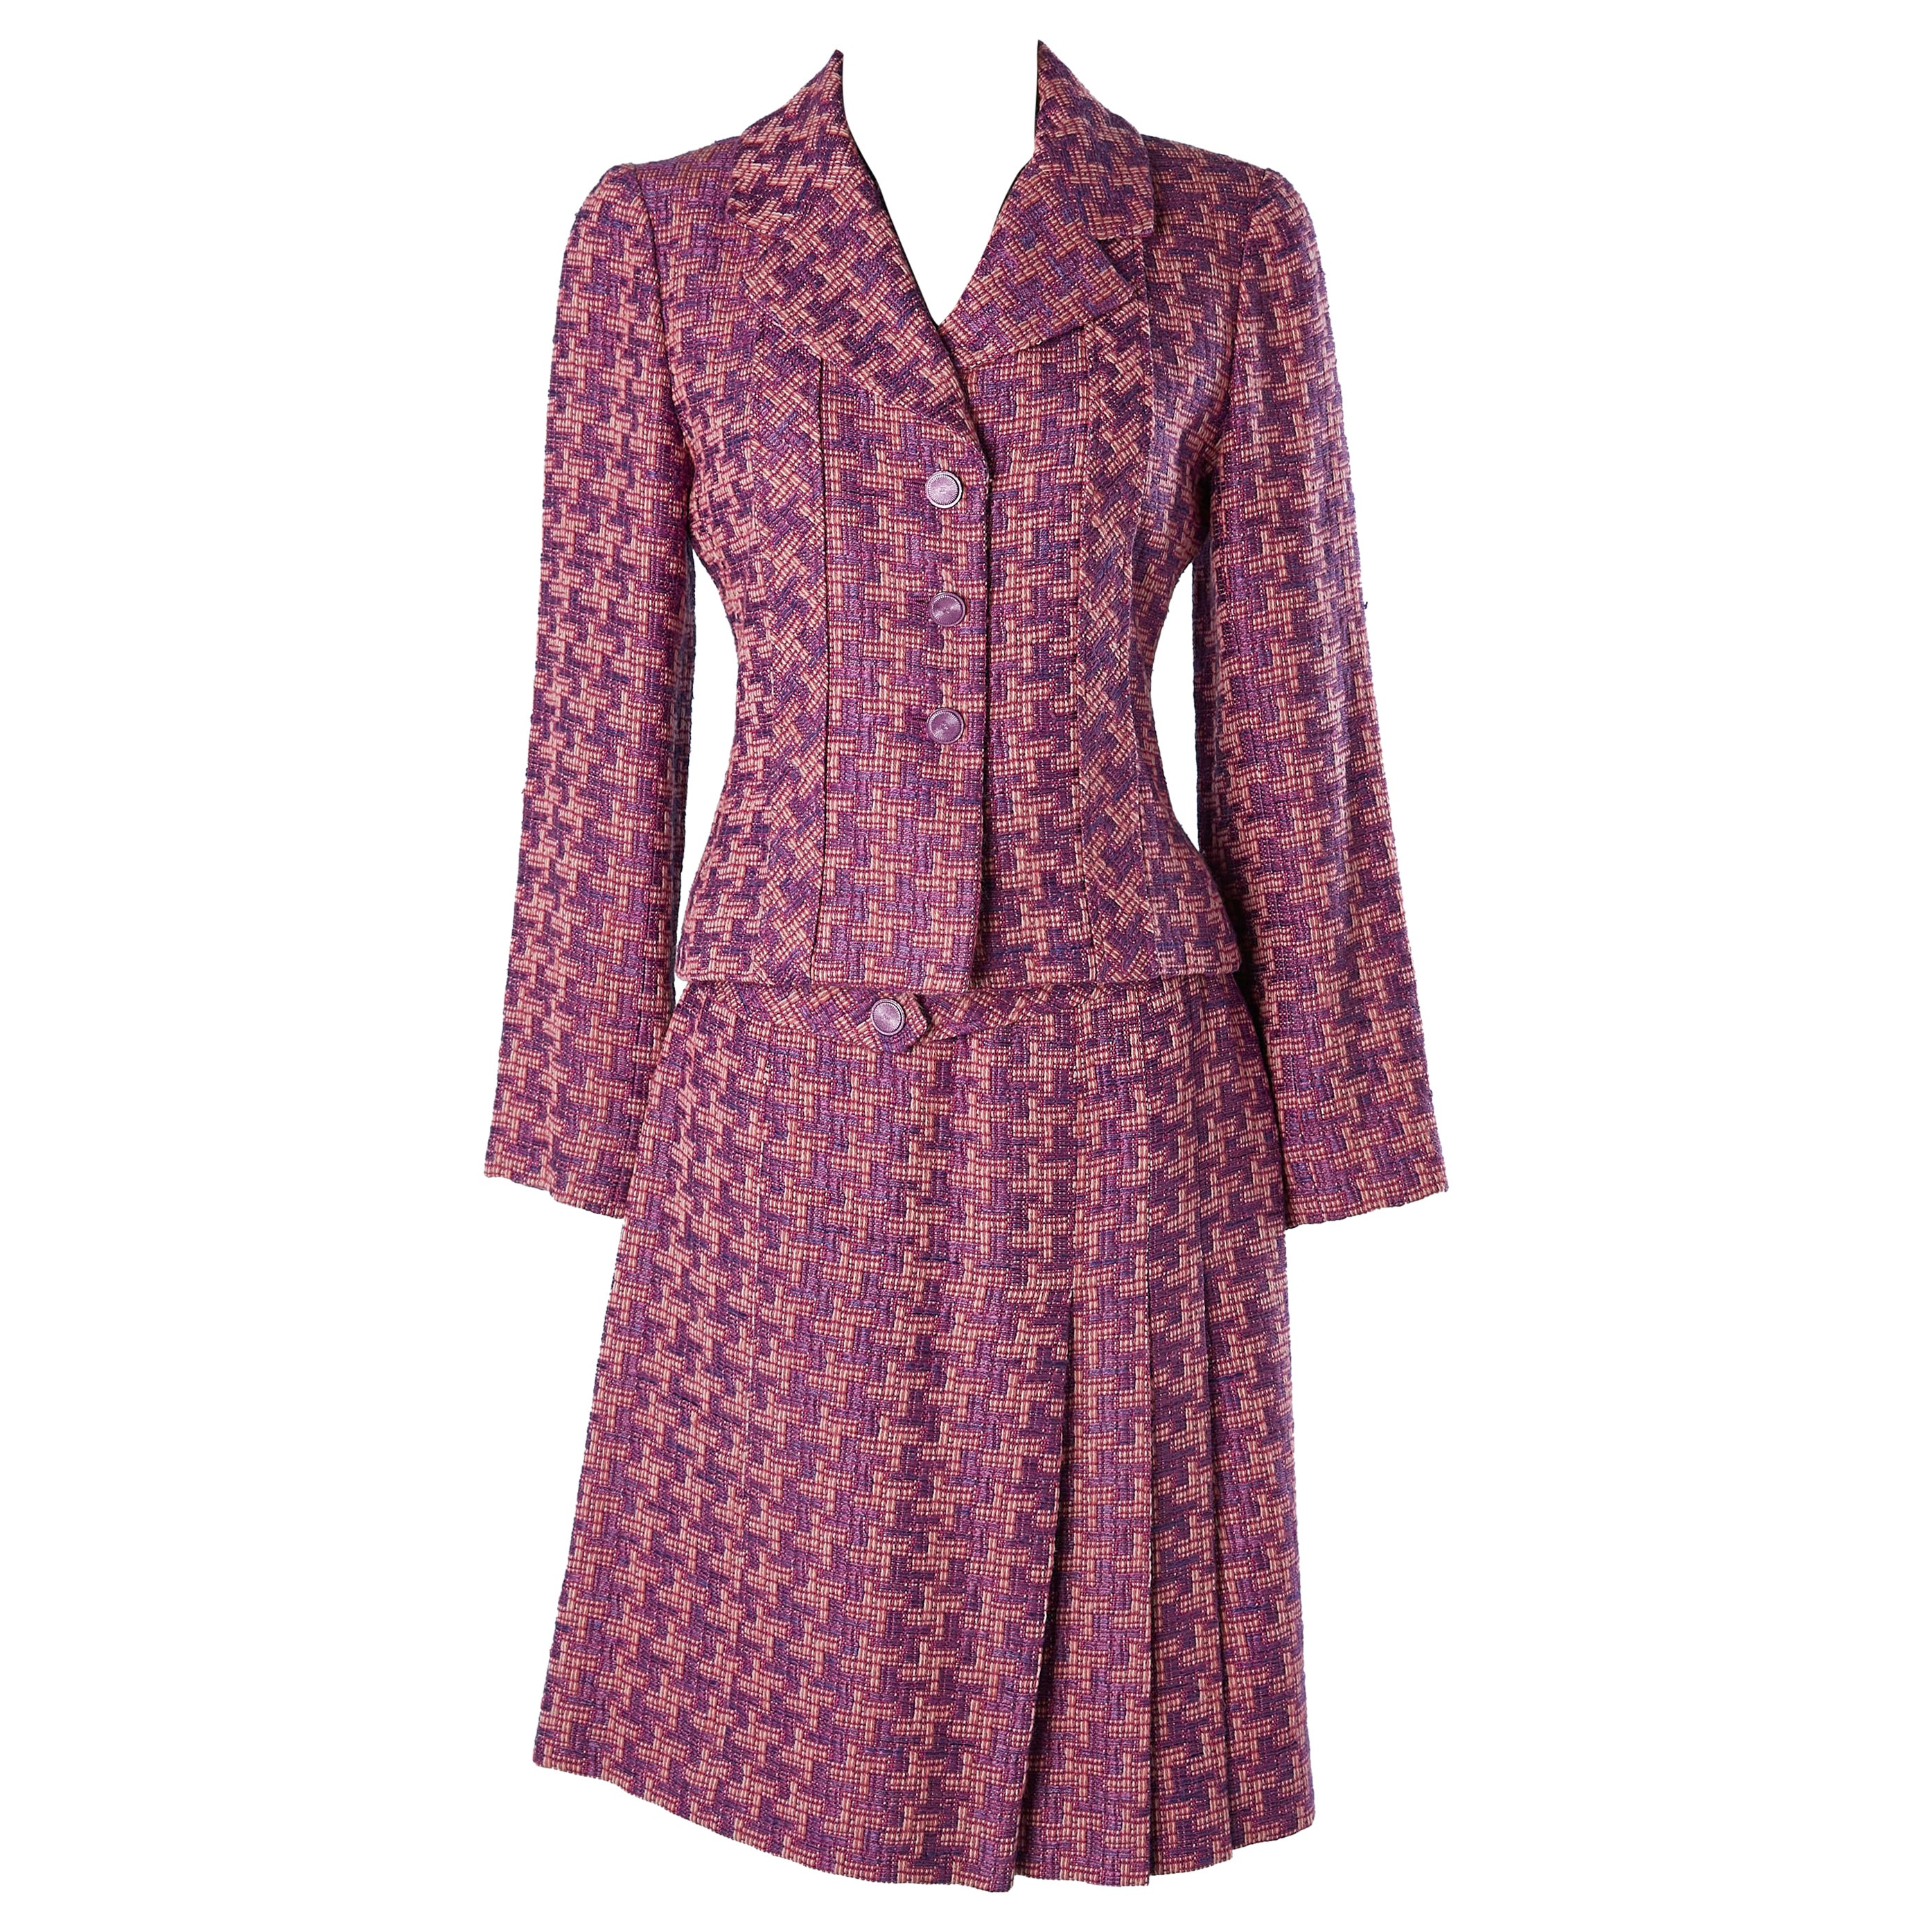 Pink and purple tweed skirt suit with belt Chanel  For Sale